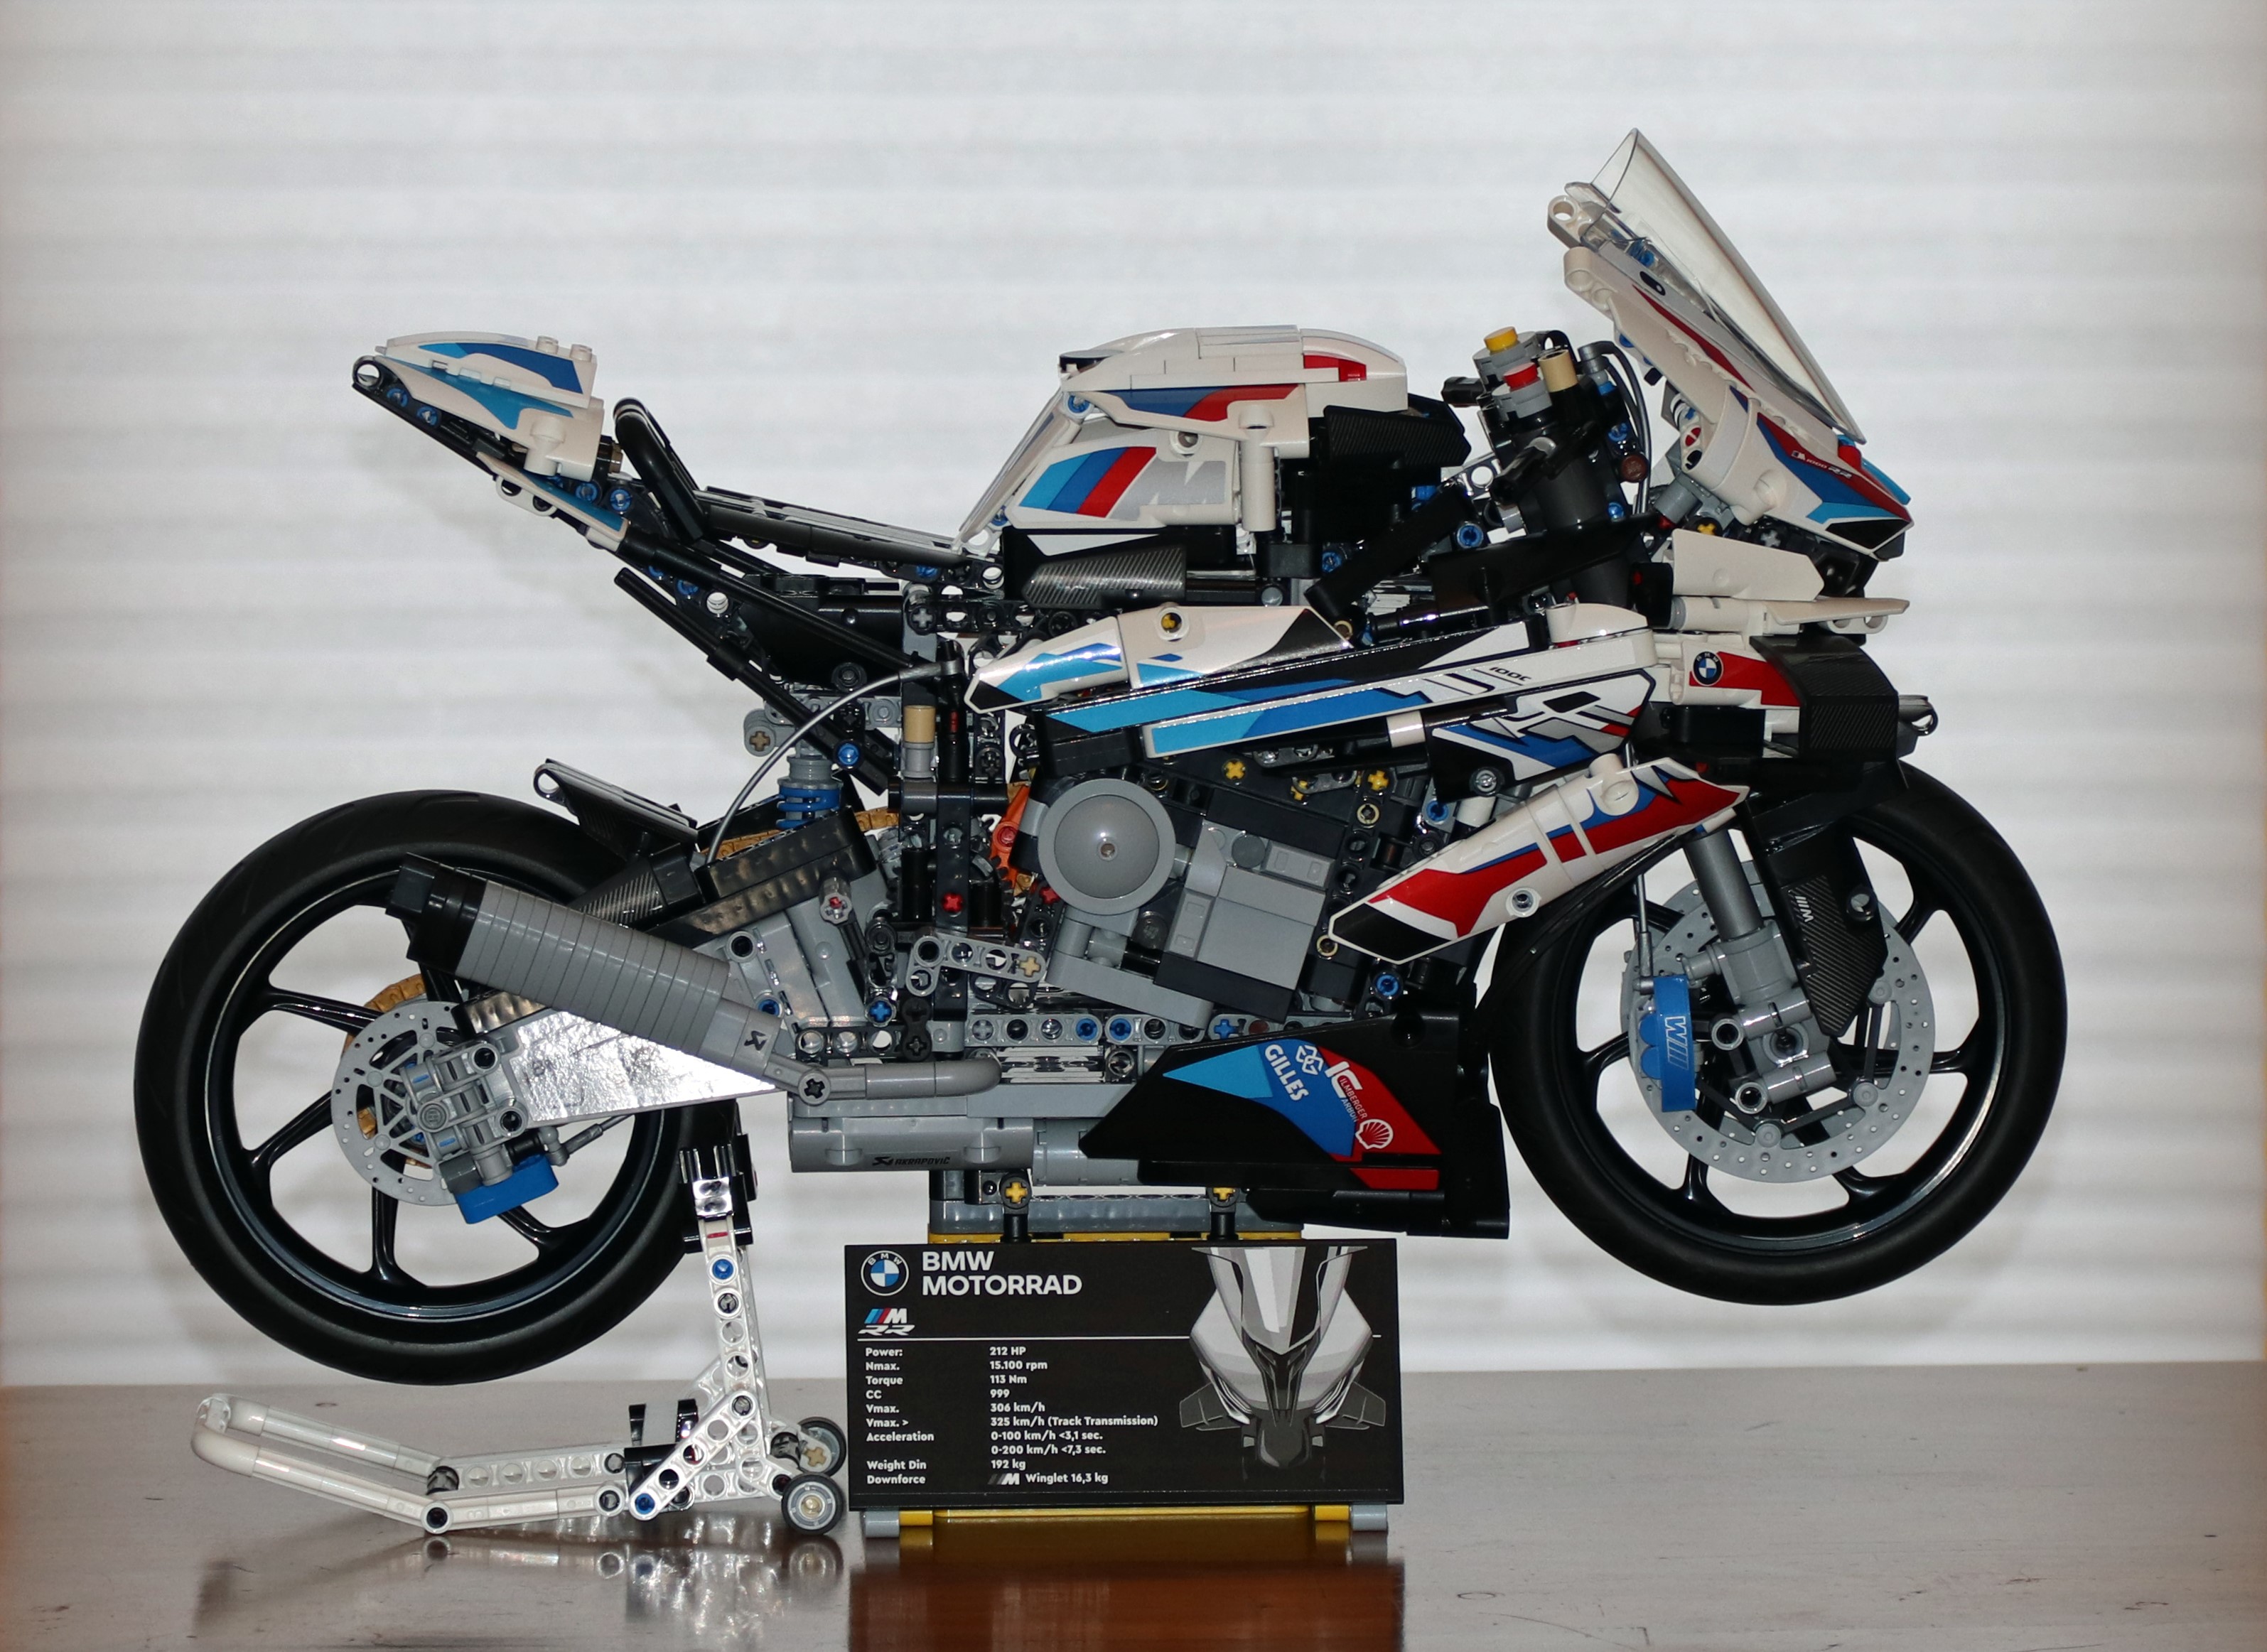 Lego BMW motorcycle becomes a concept hoverbike